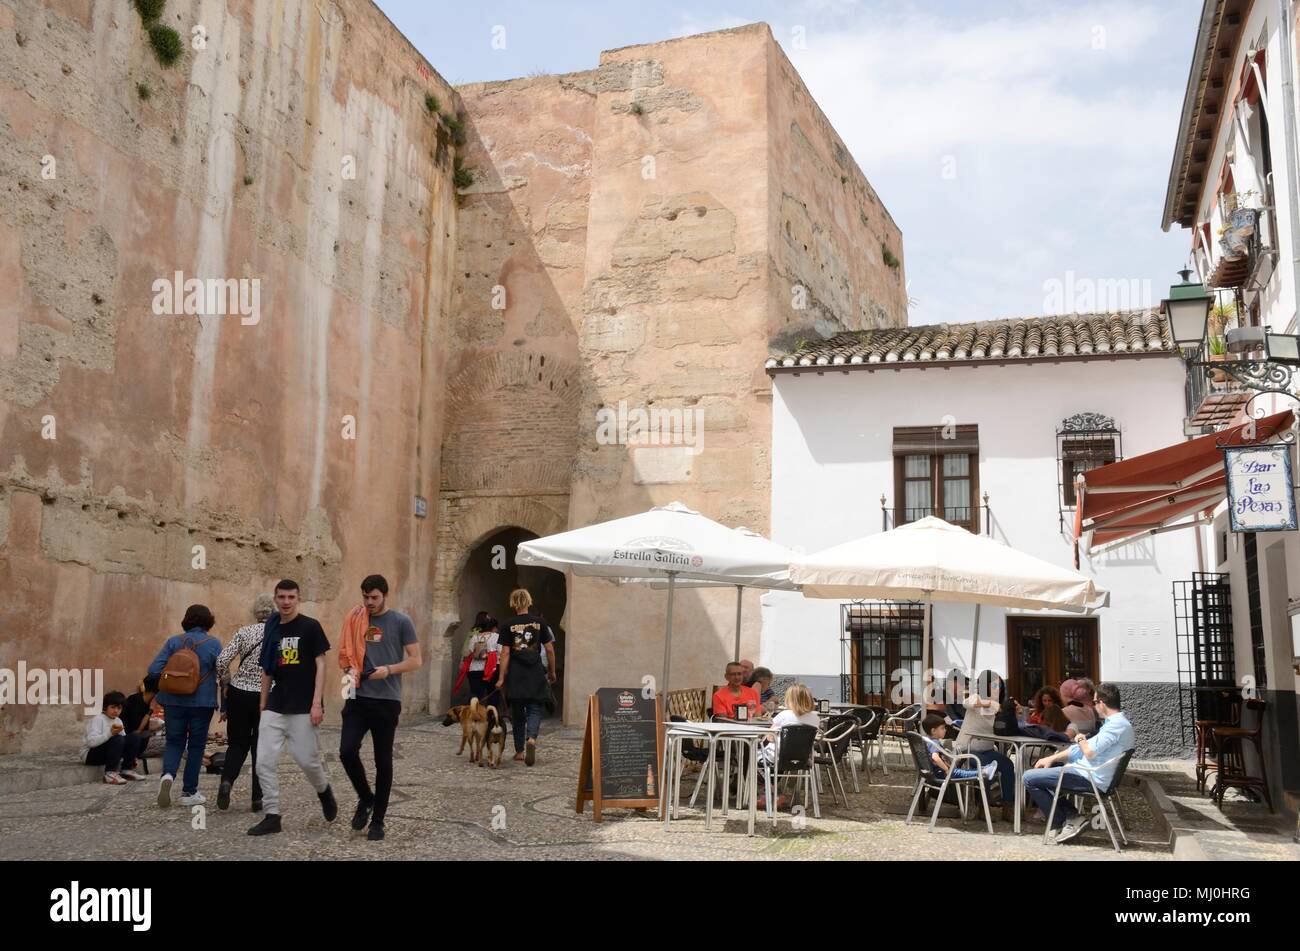 People at outdoors restaurant in plaza next to historical city gate in the Albaicin district of   Granada,  Andalusia, Spain. Stock Photo